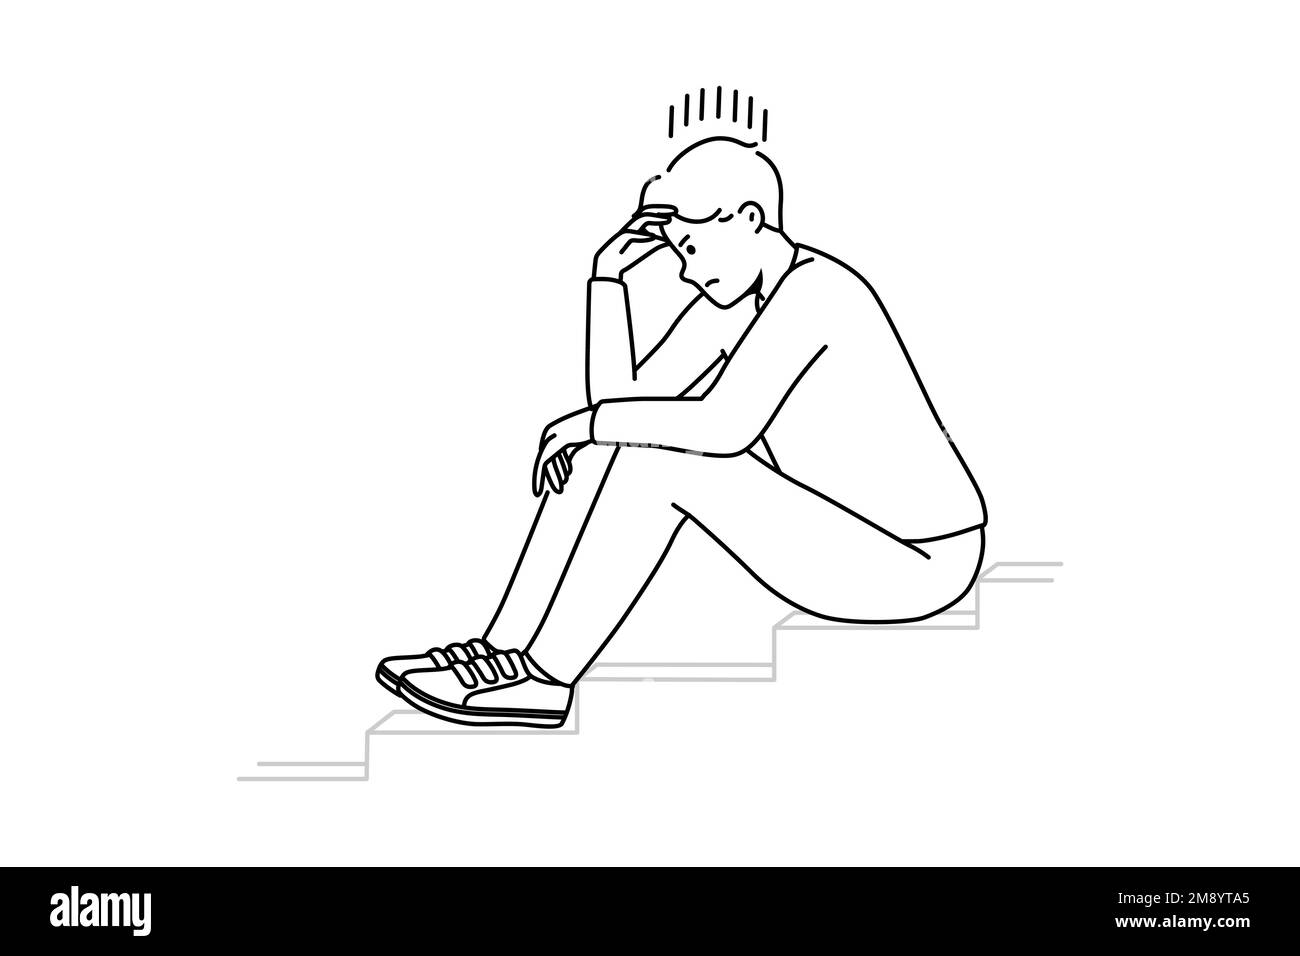 Stressed man sit on stairs thinking or making plan. Distressed unhappy guy lost in thoughts having dilemma or issue. Vector illustration.  Stock Vector